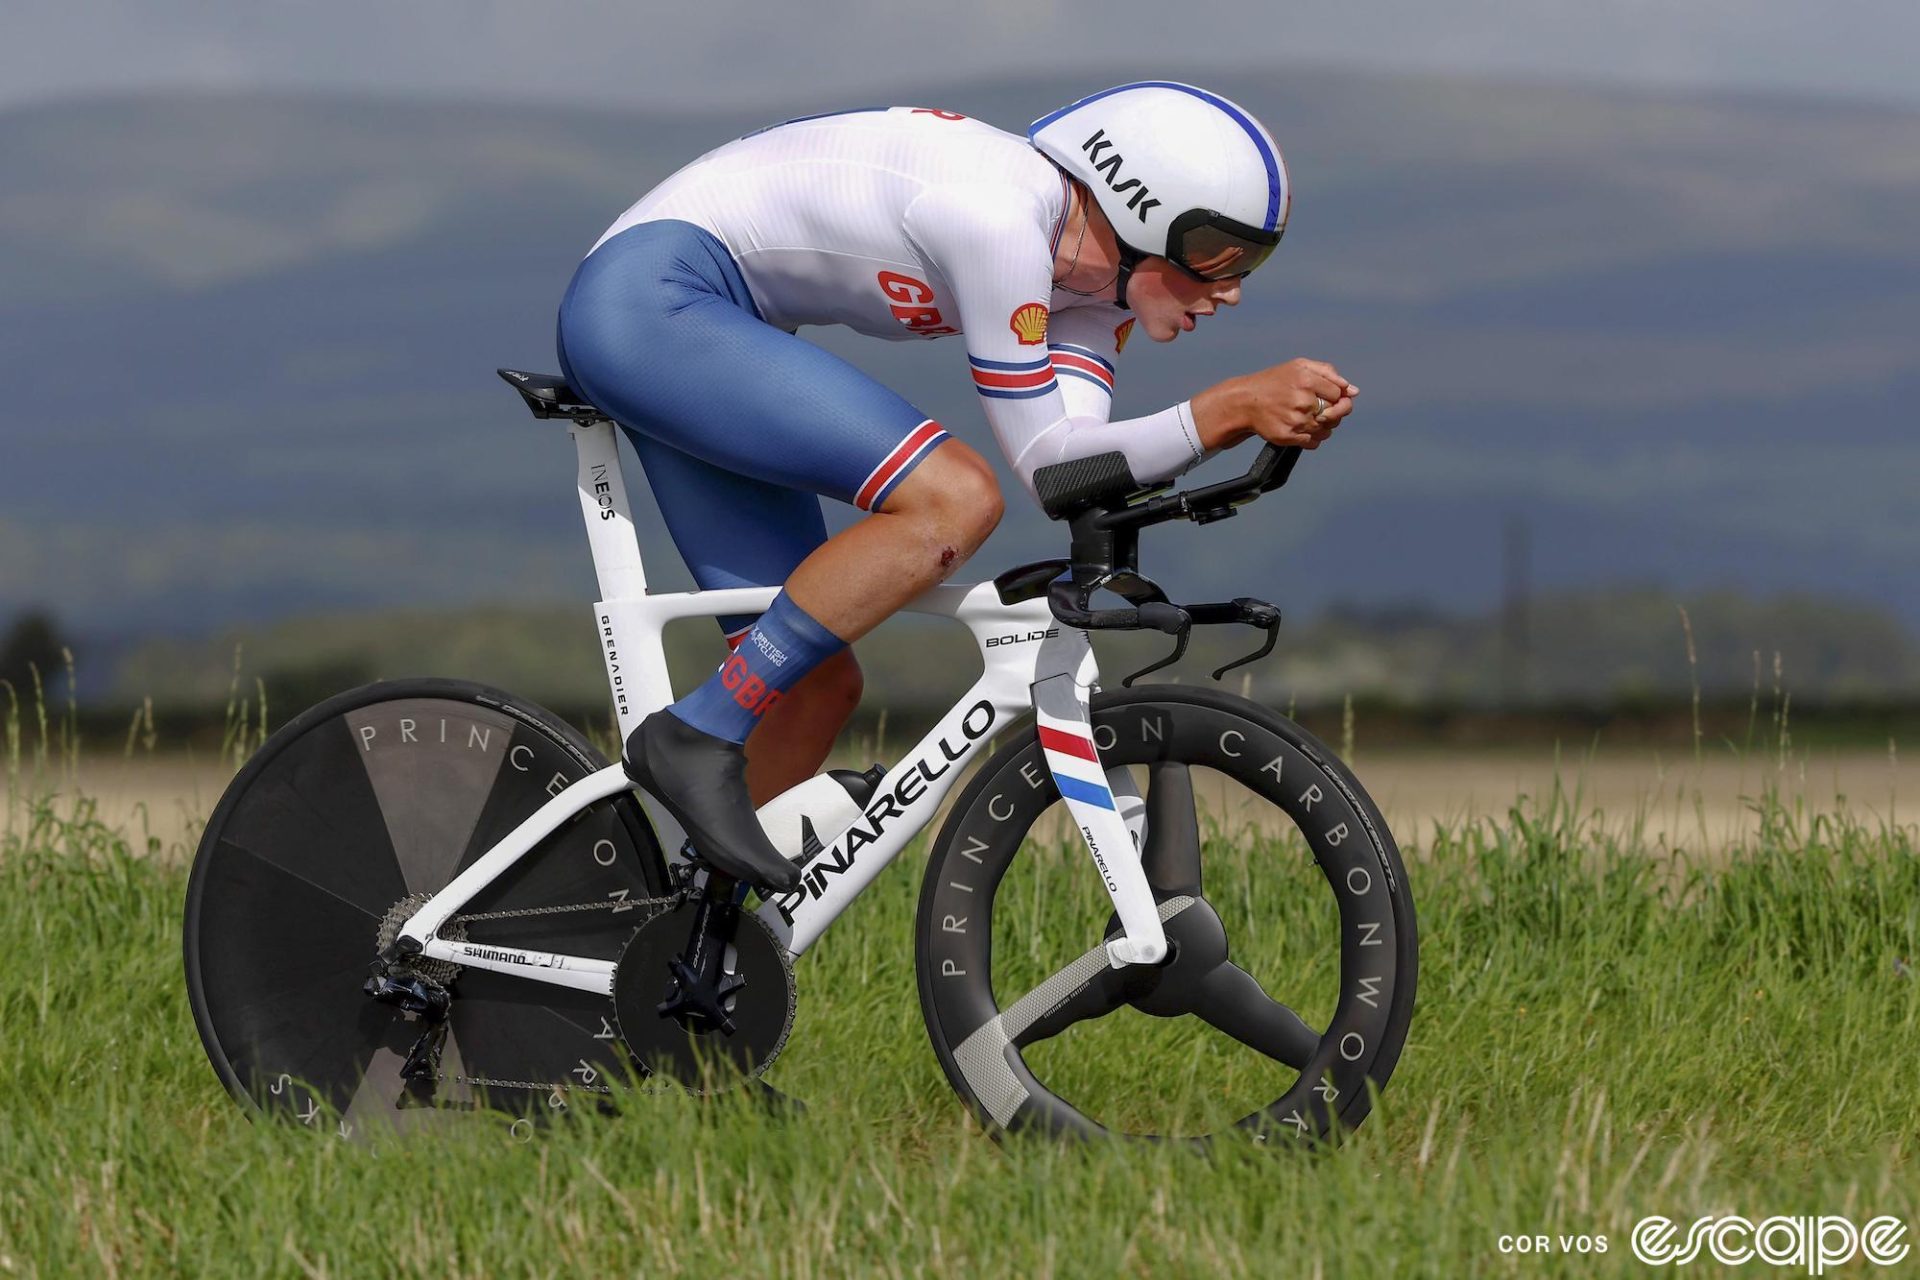 Britain's Joshua Tarling races across the Scottish landscape in the 2023 World Time Trial Championships. He's wearing the white and blue kit of the British national team, aboard a white Pinarello Bolide time trial bike, in an efficient aero tuck.